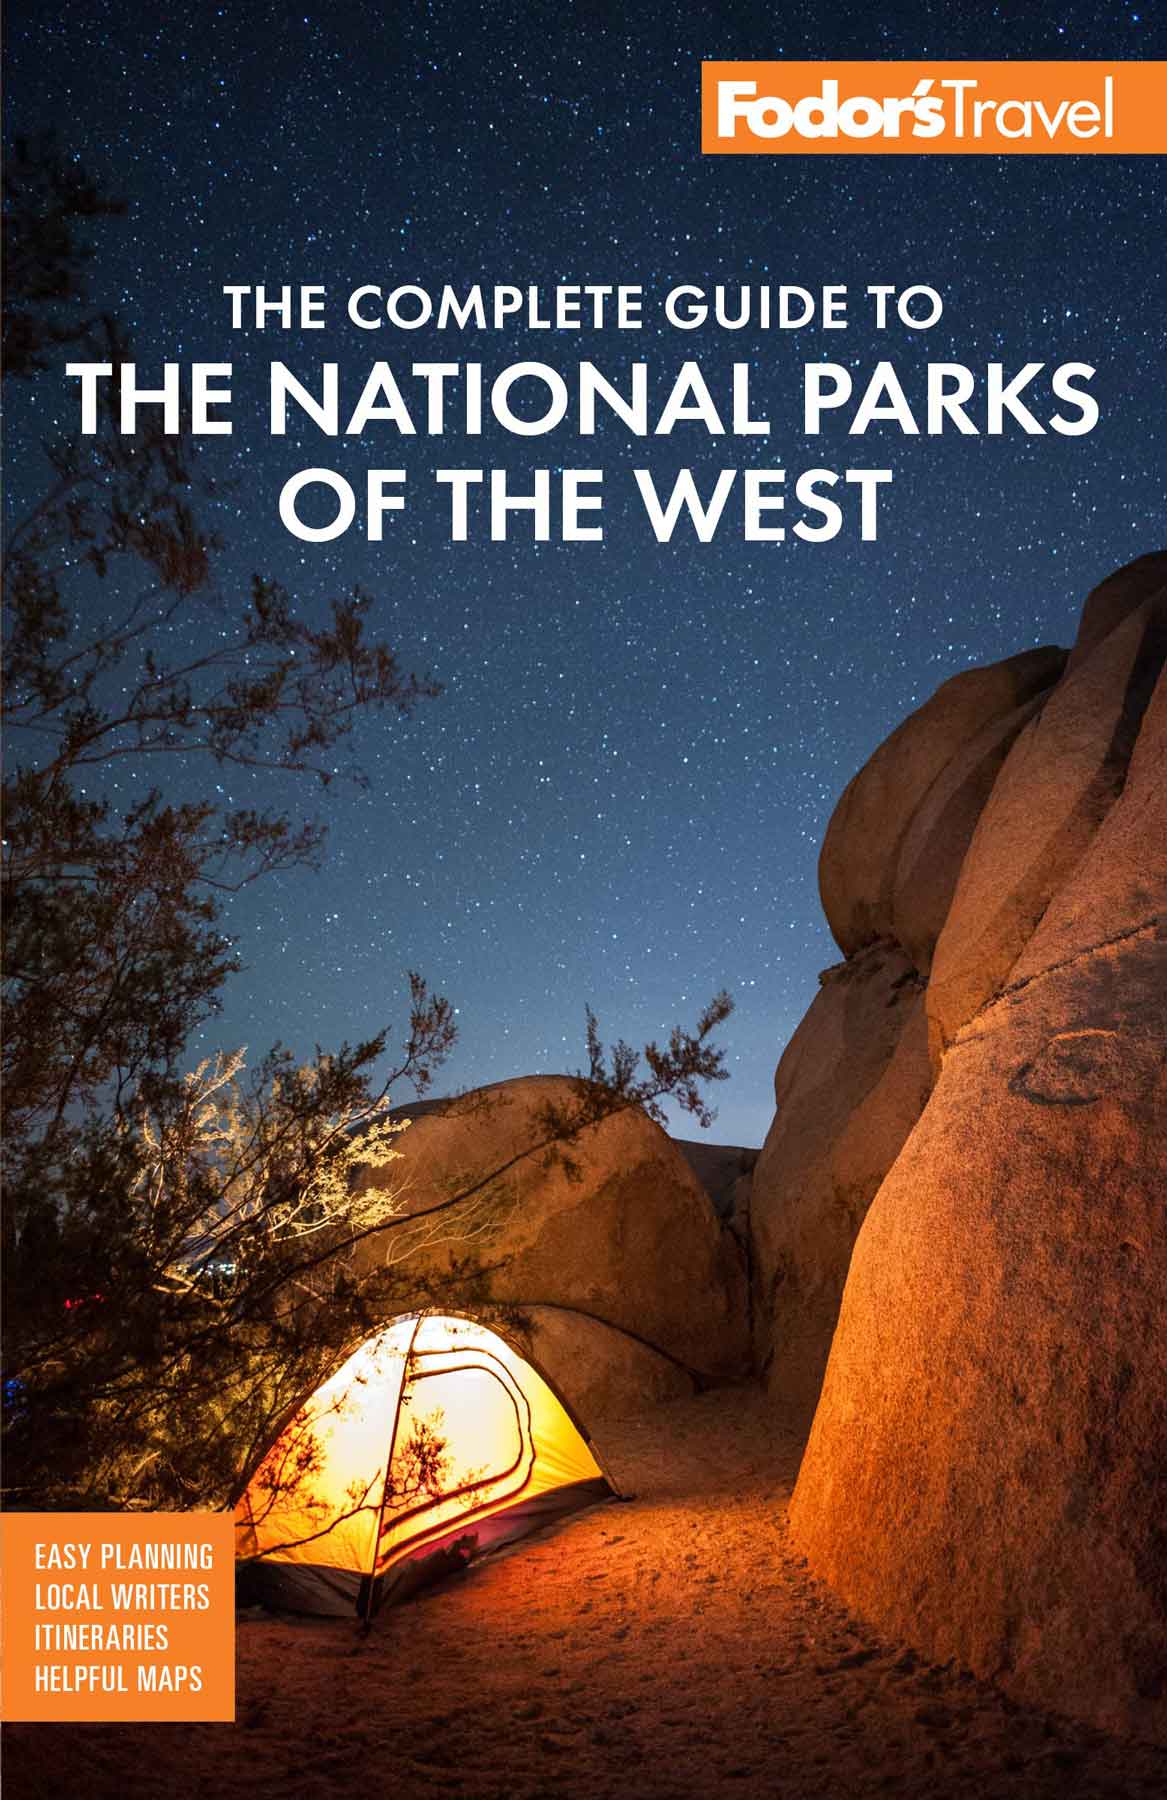 best national park books fodors national parks of the west